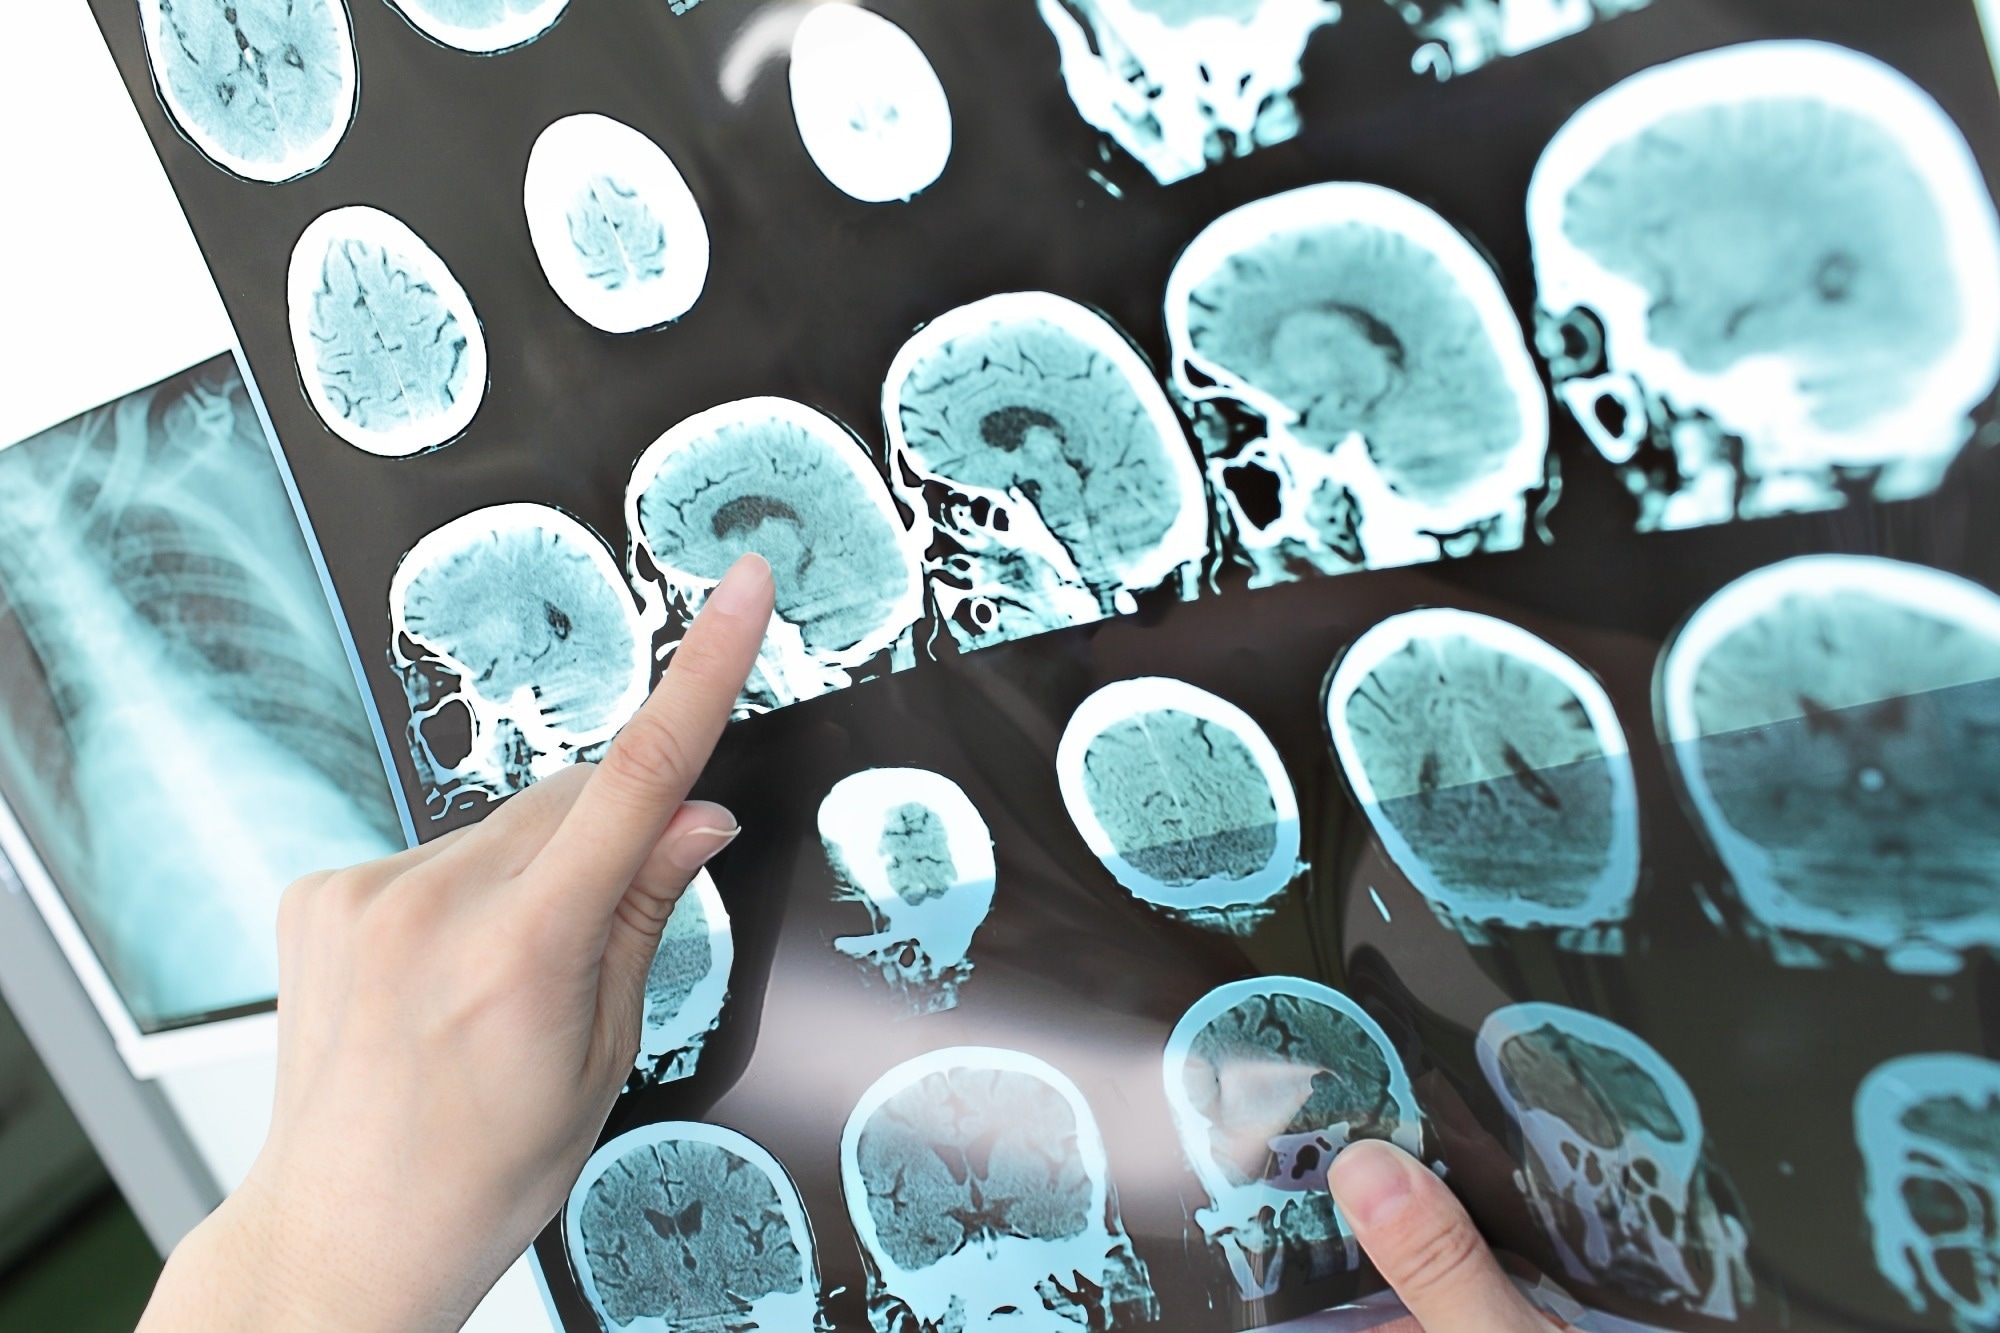 Study: Stroke genetics informs drug discovery and risk prediction across ancestries. Image Credit: sfam_photo/Shutterstock